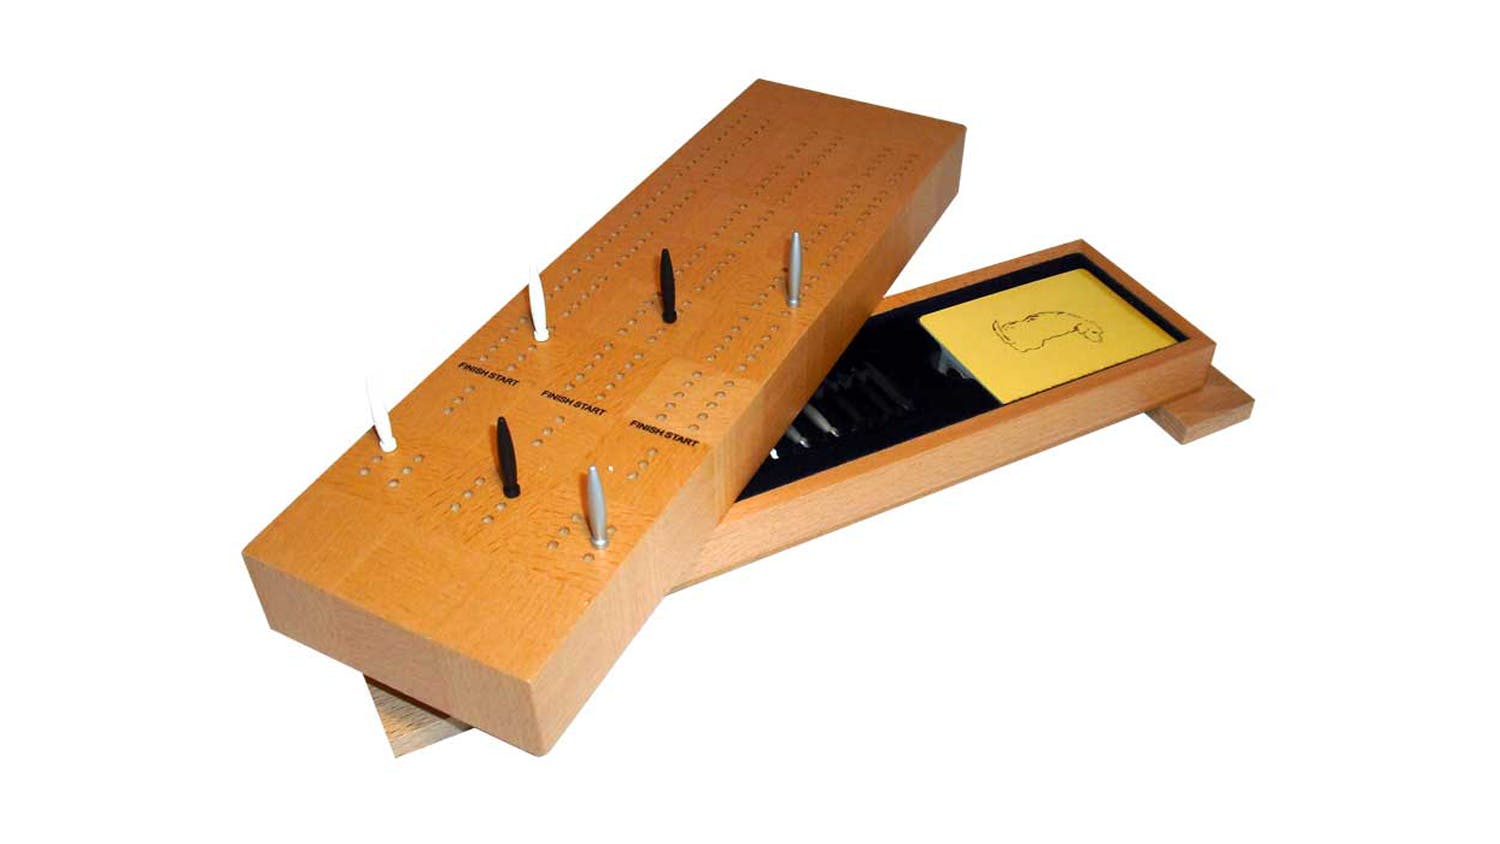 Dal Rossi Deluxe Cribbage Case with Cards